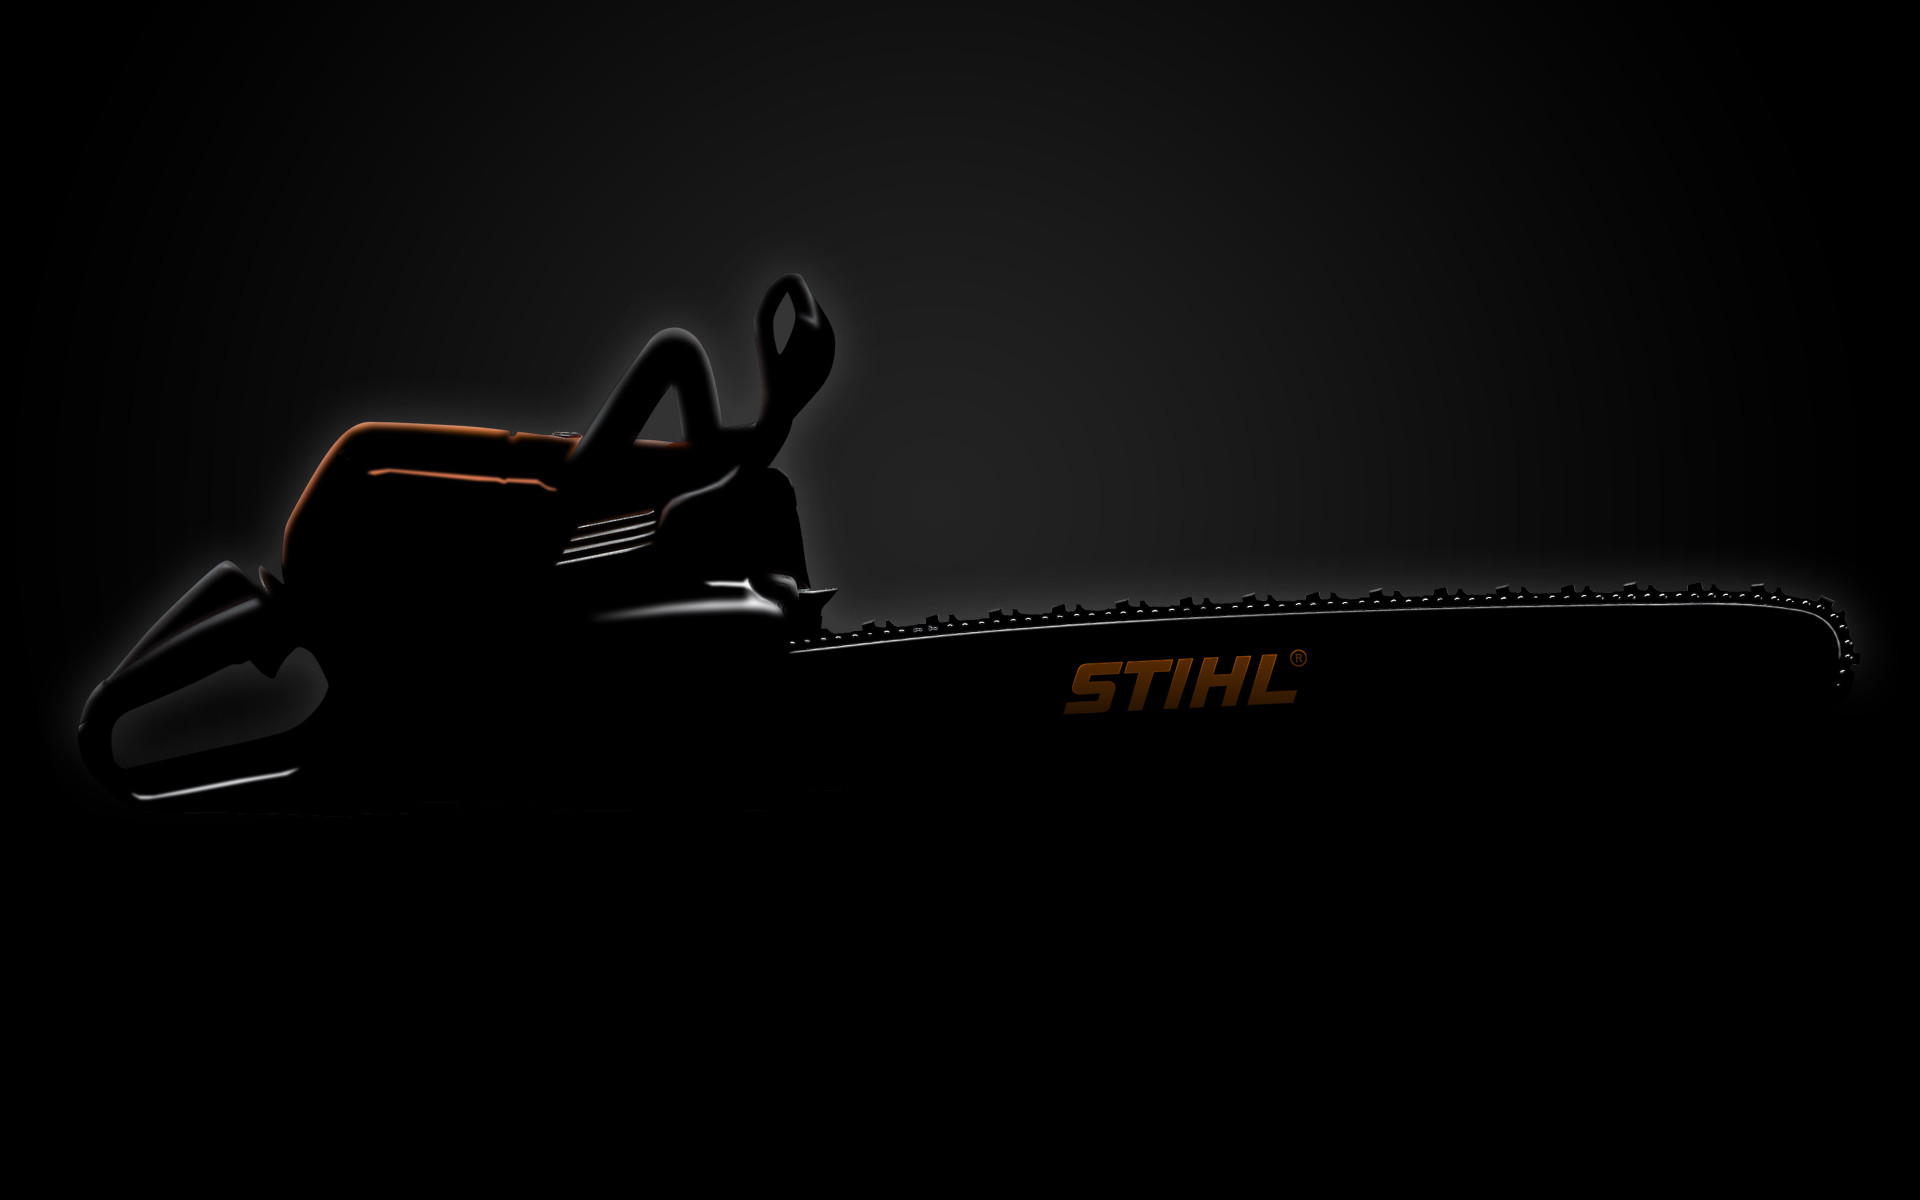 Stihl Wallpaper Background In HD Image